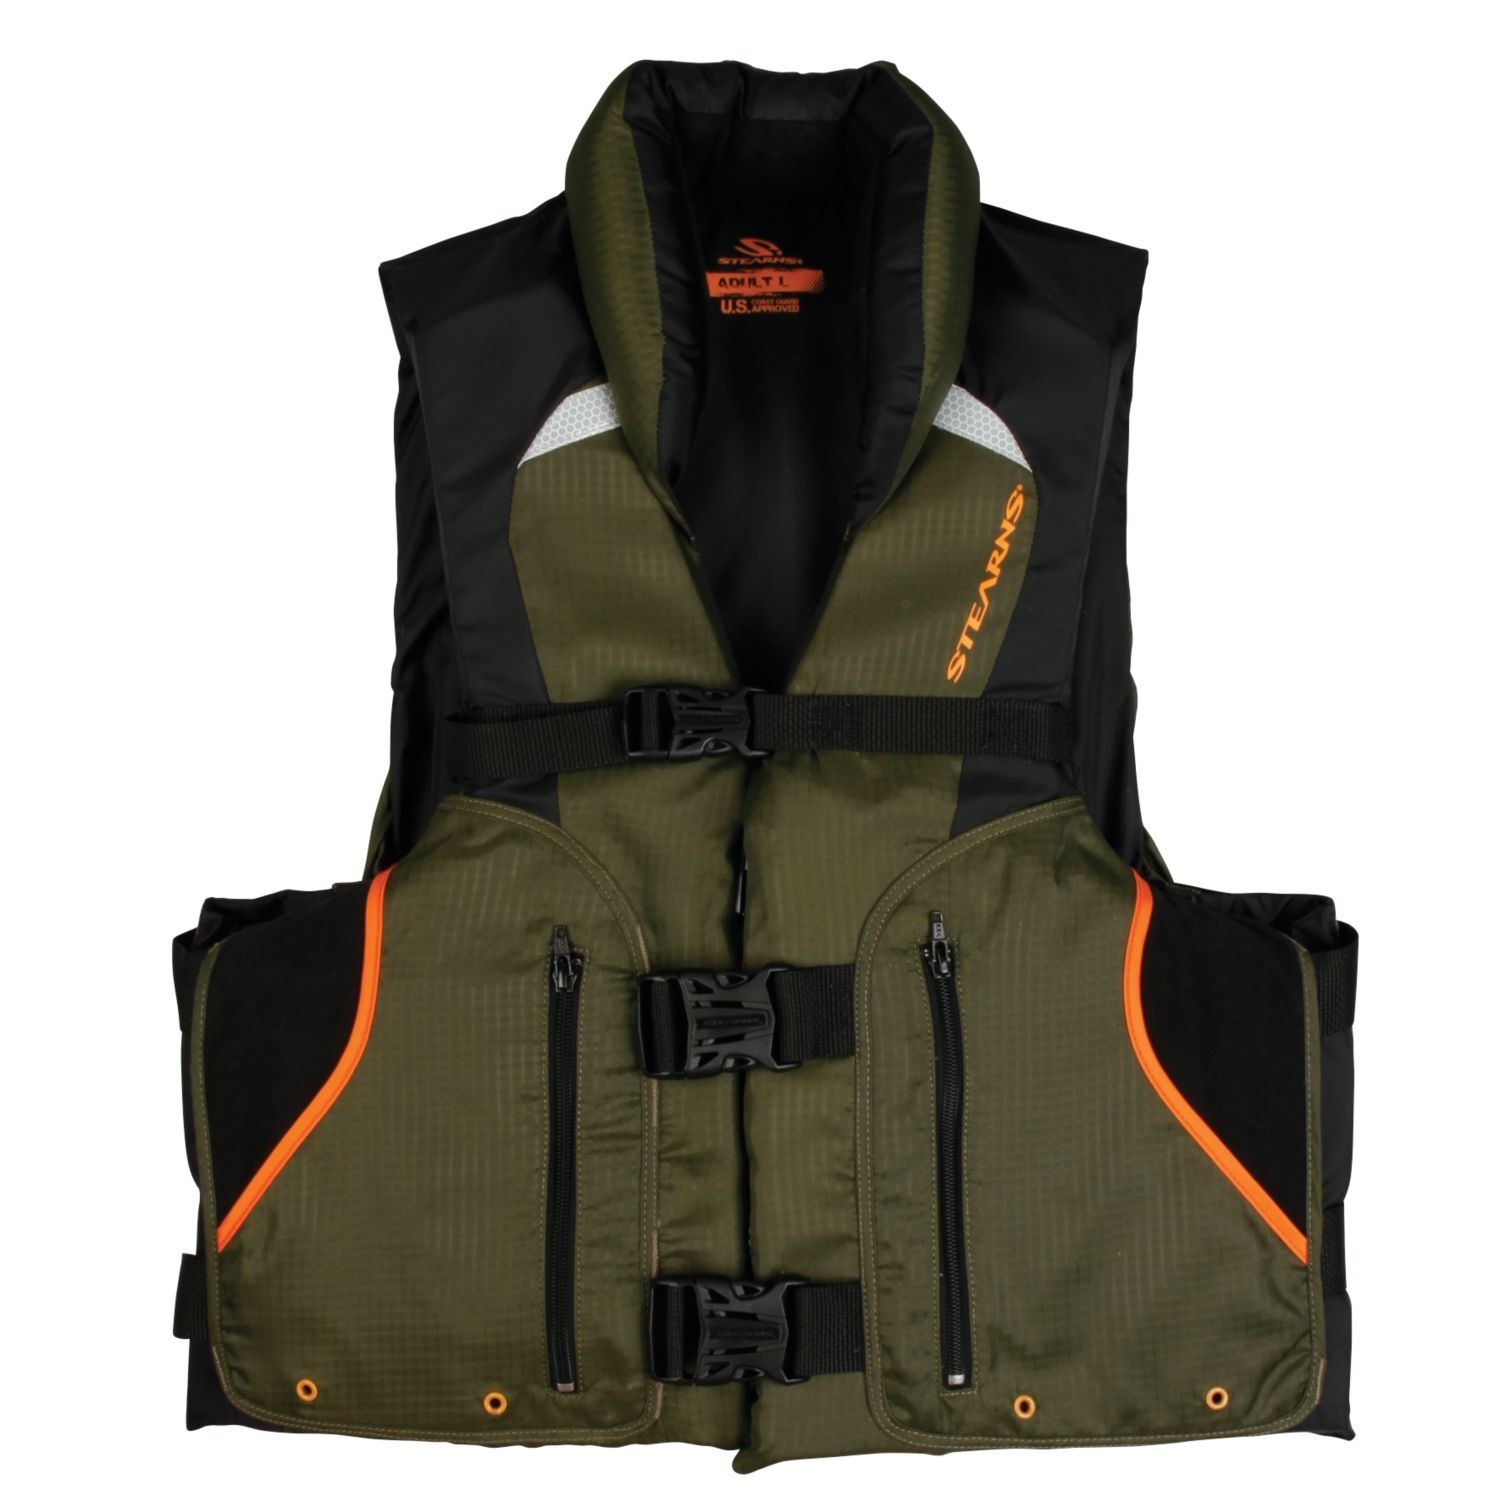 UPC 044411007722 product image for Stearns Pfd Adult Competitor Series Ripstop Nylon Vest 4X/7X | upcitemdb.com